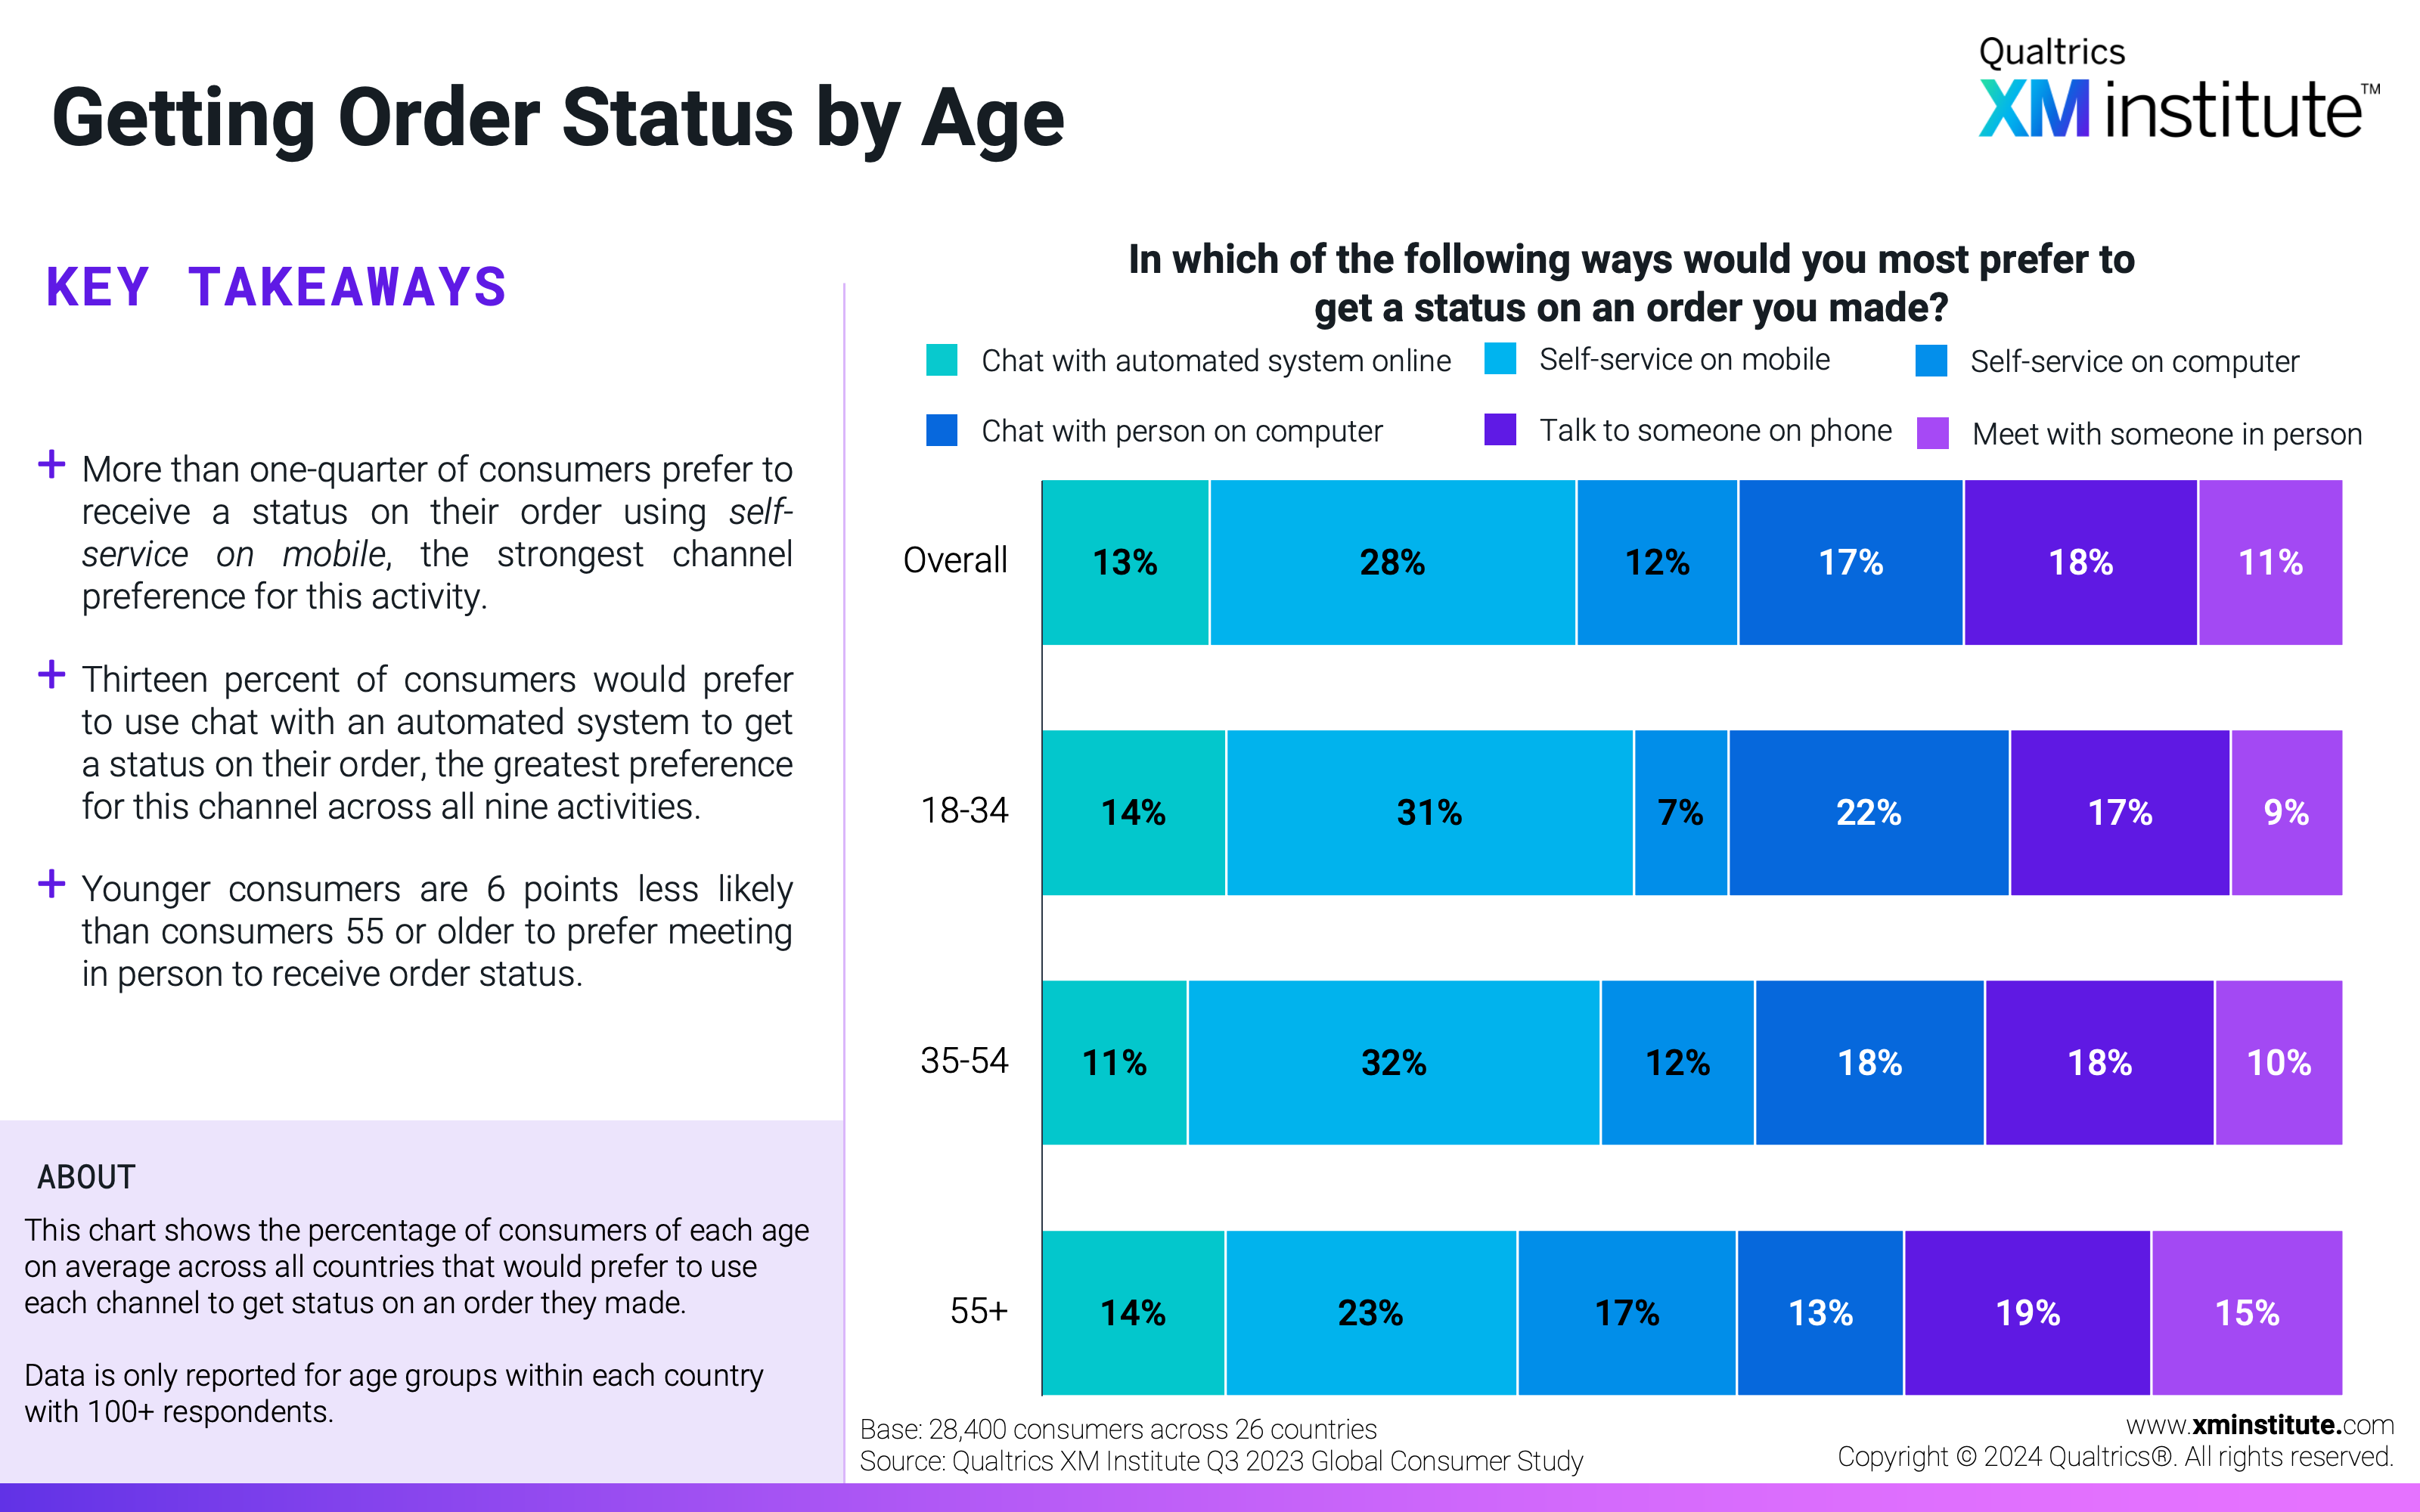 This chart shows the percentage of consumers of each age on average across all countries that would prefer to use each channel to get status on an order they made. 